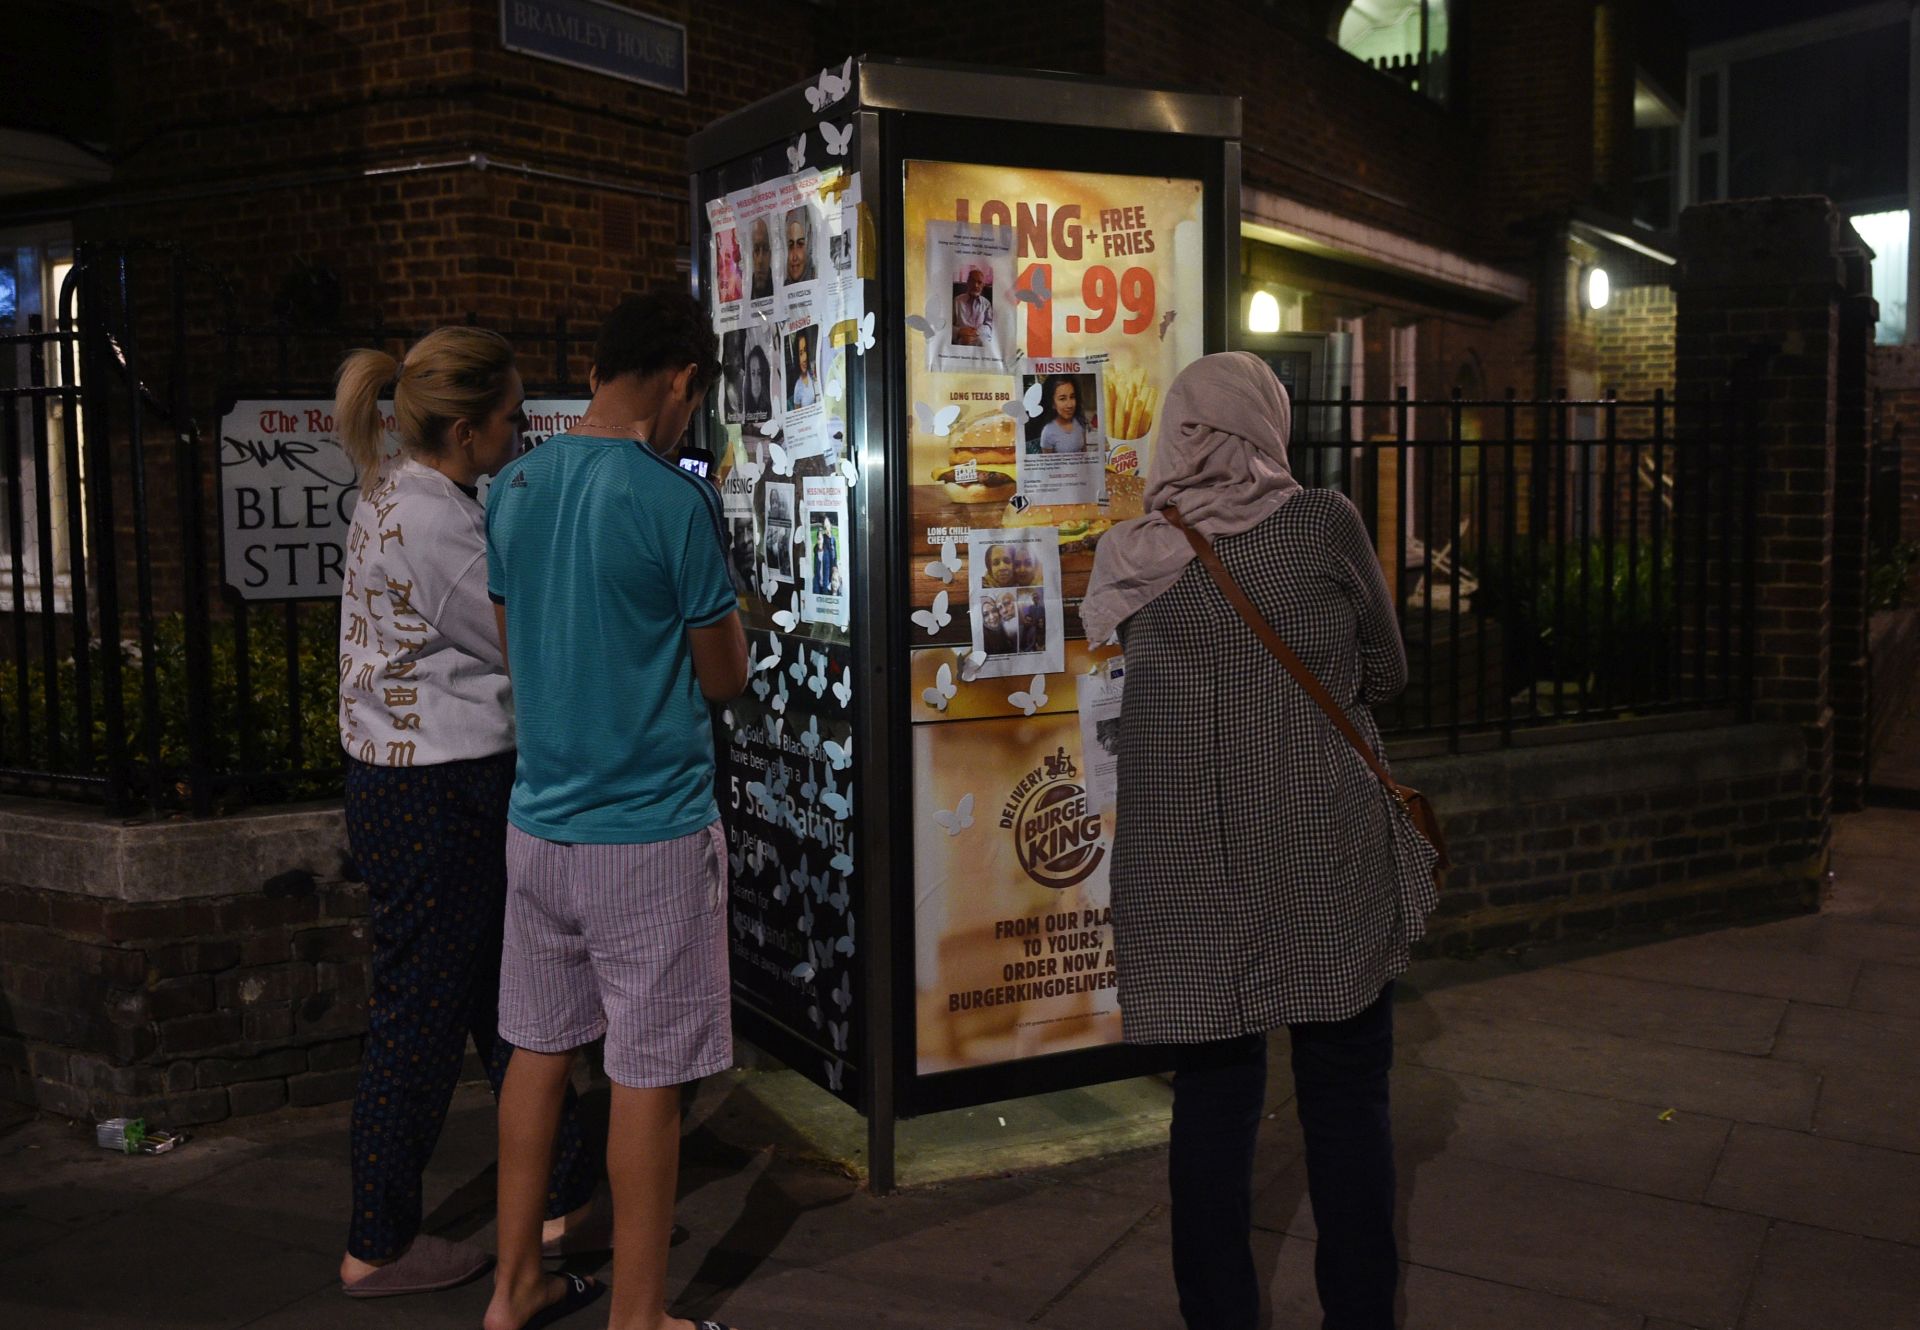 epa06030595 People look at photographs of missing persons in a phone box near where the fire broke out at Grenfell Tower, a 24-storey apartment block in North Kensington, London, Britain, 15 June 2017. London Fire Brigade (LFB), said it took 40 fire engines and 200 firefighters to put out the blaze that broke out at around 1:00 am GMT on 14 June, and which took more than 24 hours to bring under control. According to reports, 12 people were confirmed dead in the fire and the cause of the blaze remains unknown.  EPA/FACUNDO ARRIZABALAGA